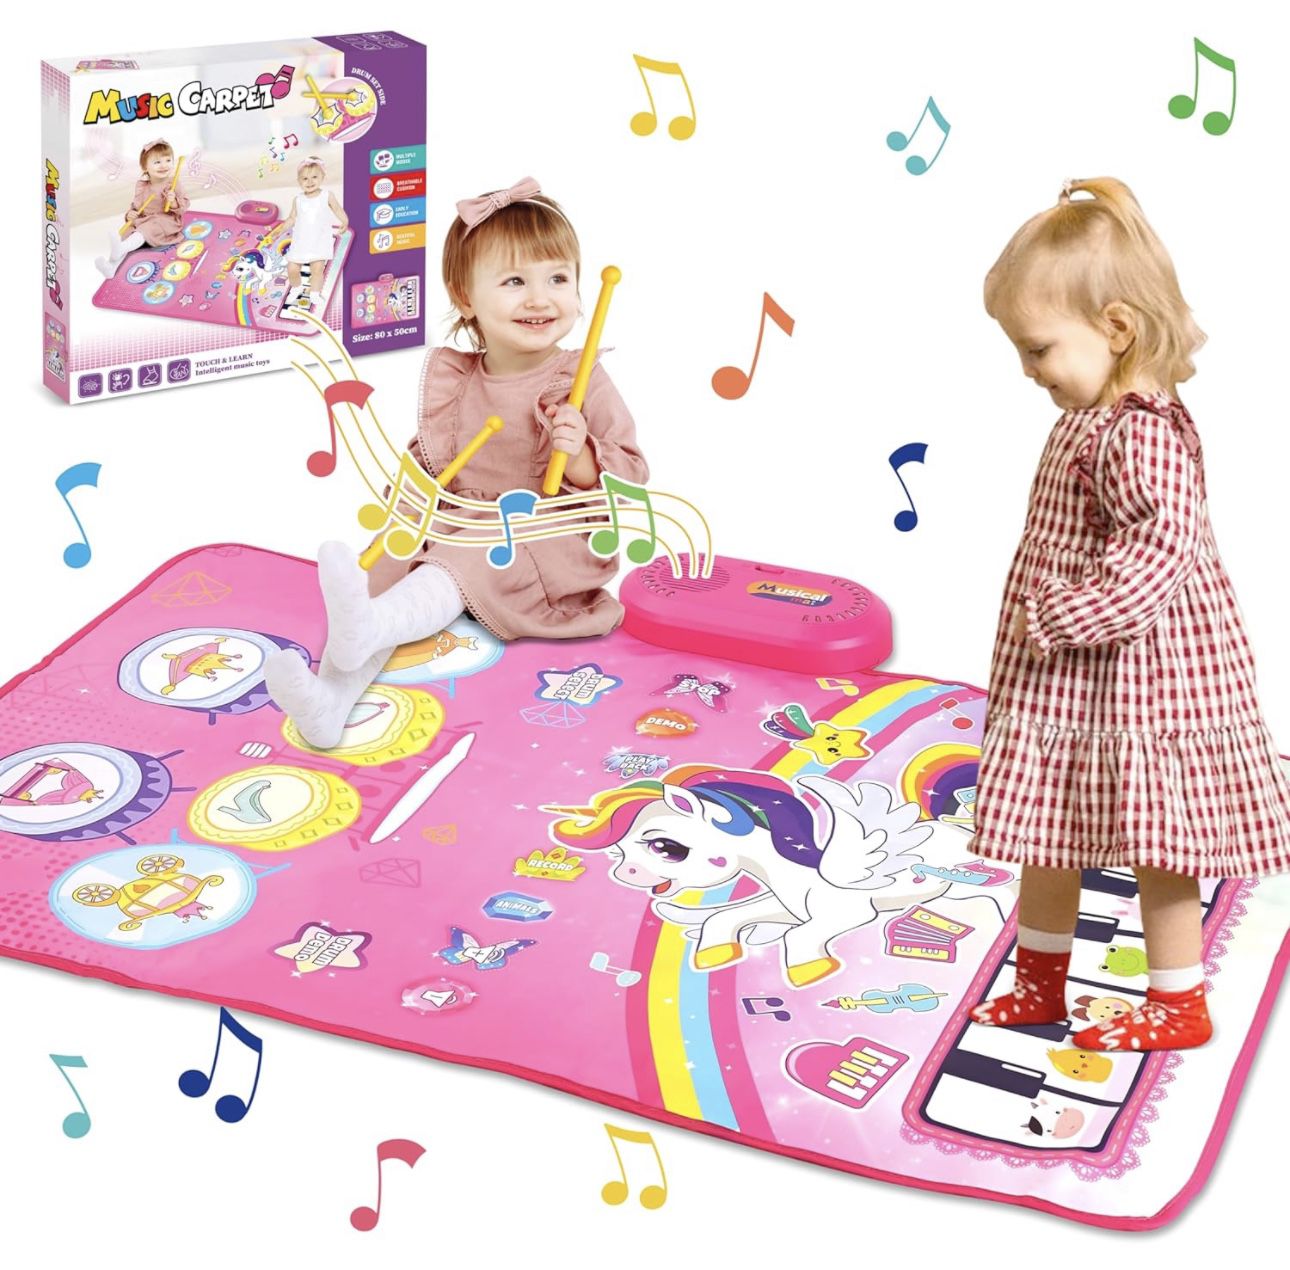 BRAND NEW 3 in 1 Piano Keyboard Drum Play Mat For Toddler